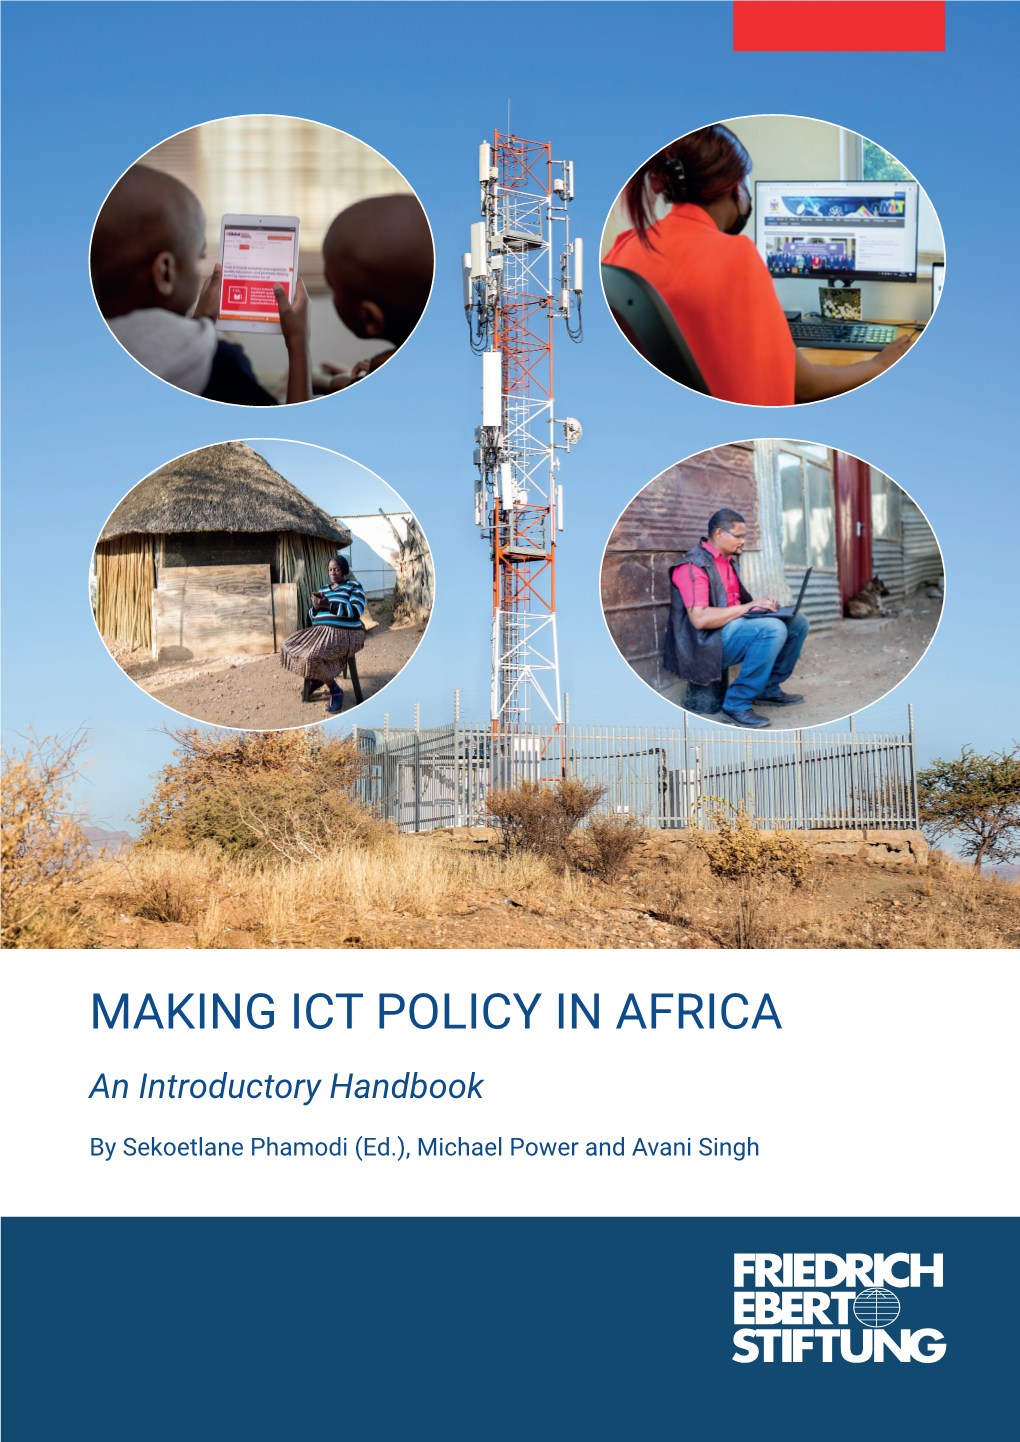 Making ICT Policy in Africa: an Introductory Handbook